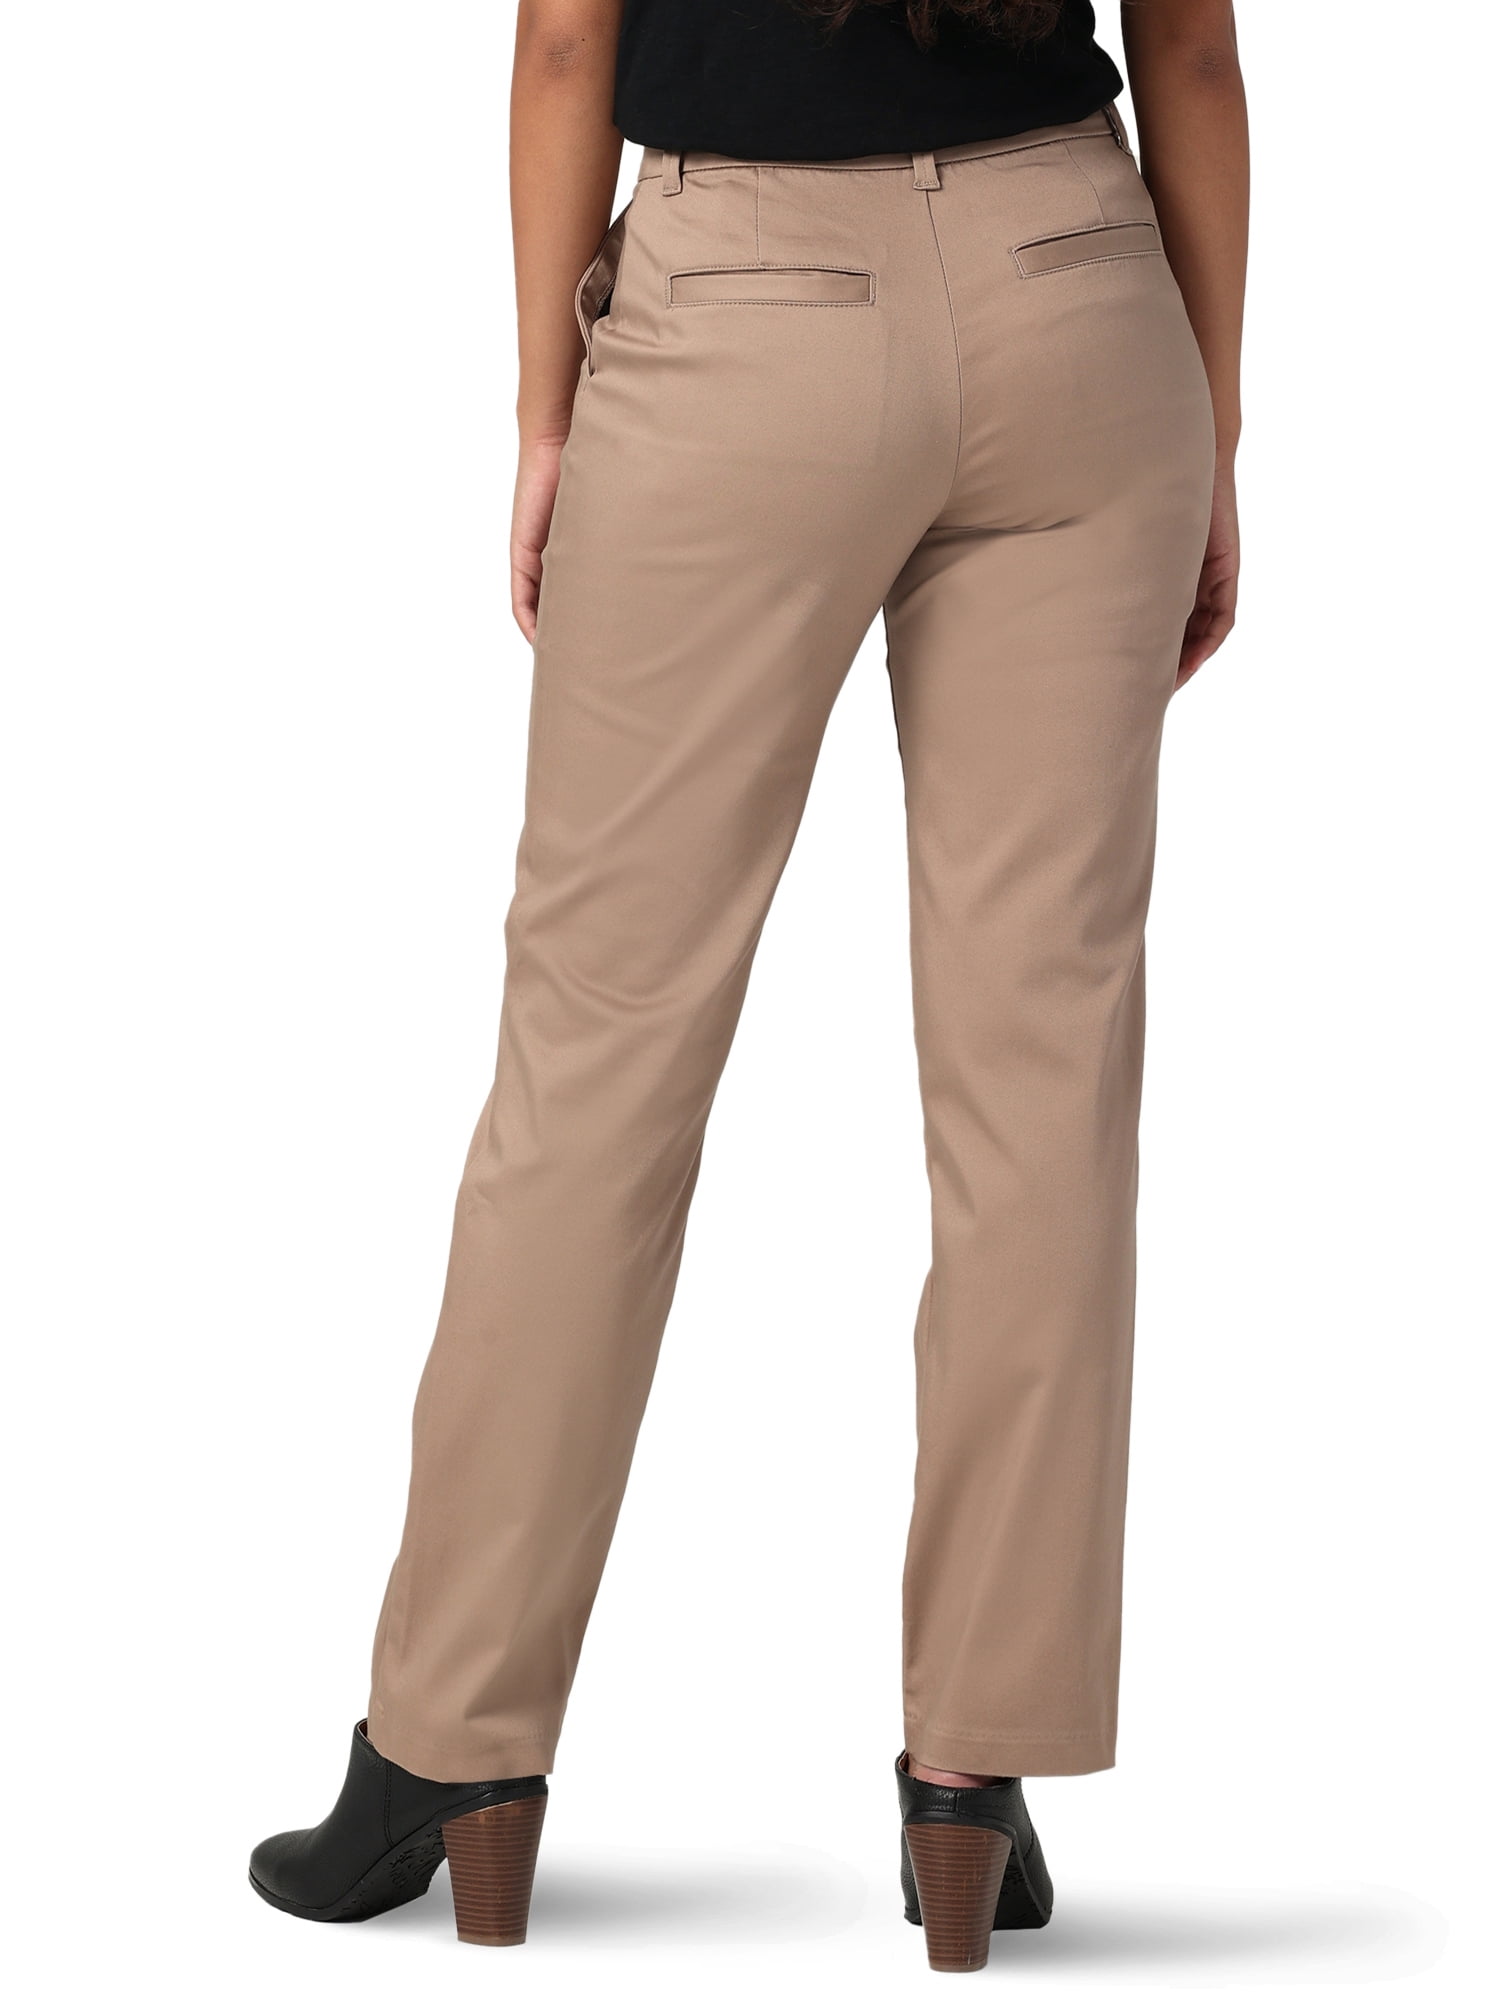 Lee Relaxed Fit Straight Leg Pant - Macy's